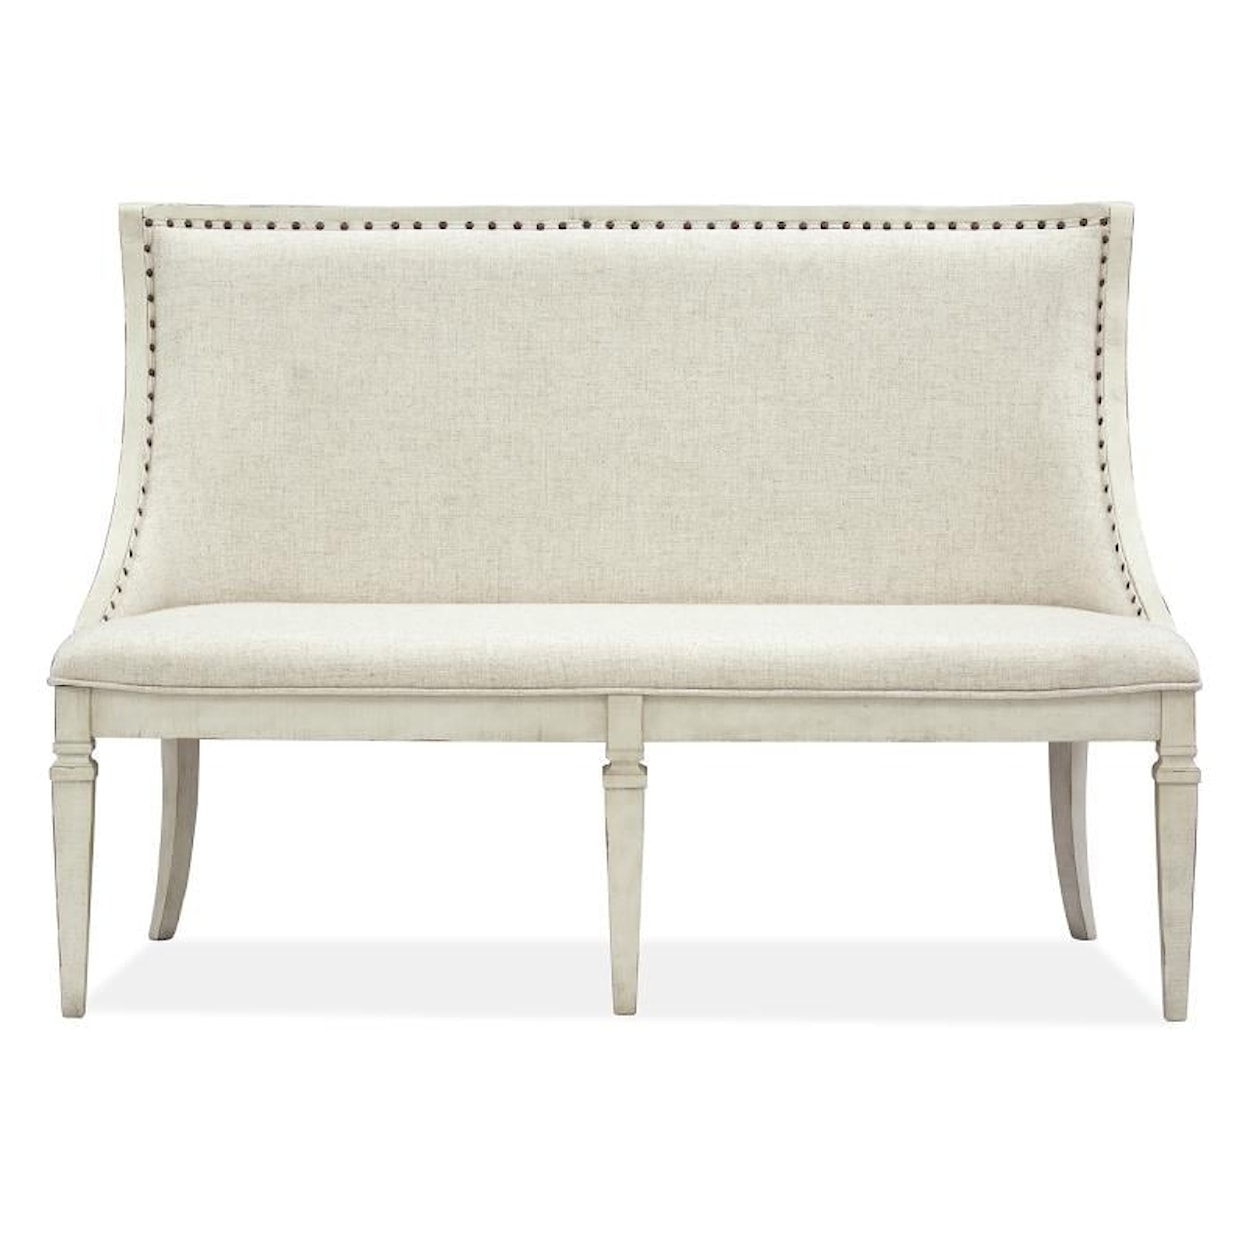 Magnussen Home Newport Dining Upholstered Dining Bench
